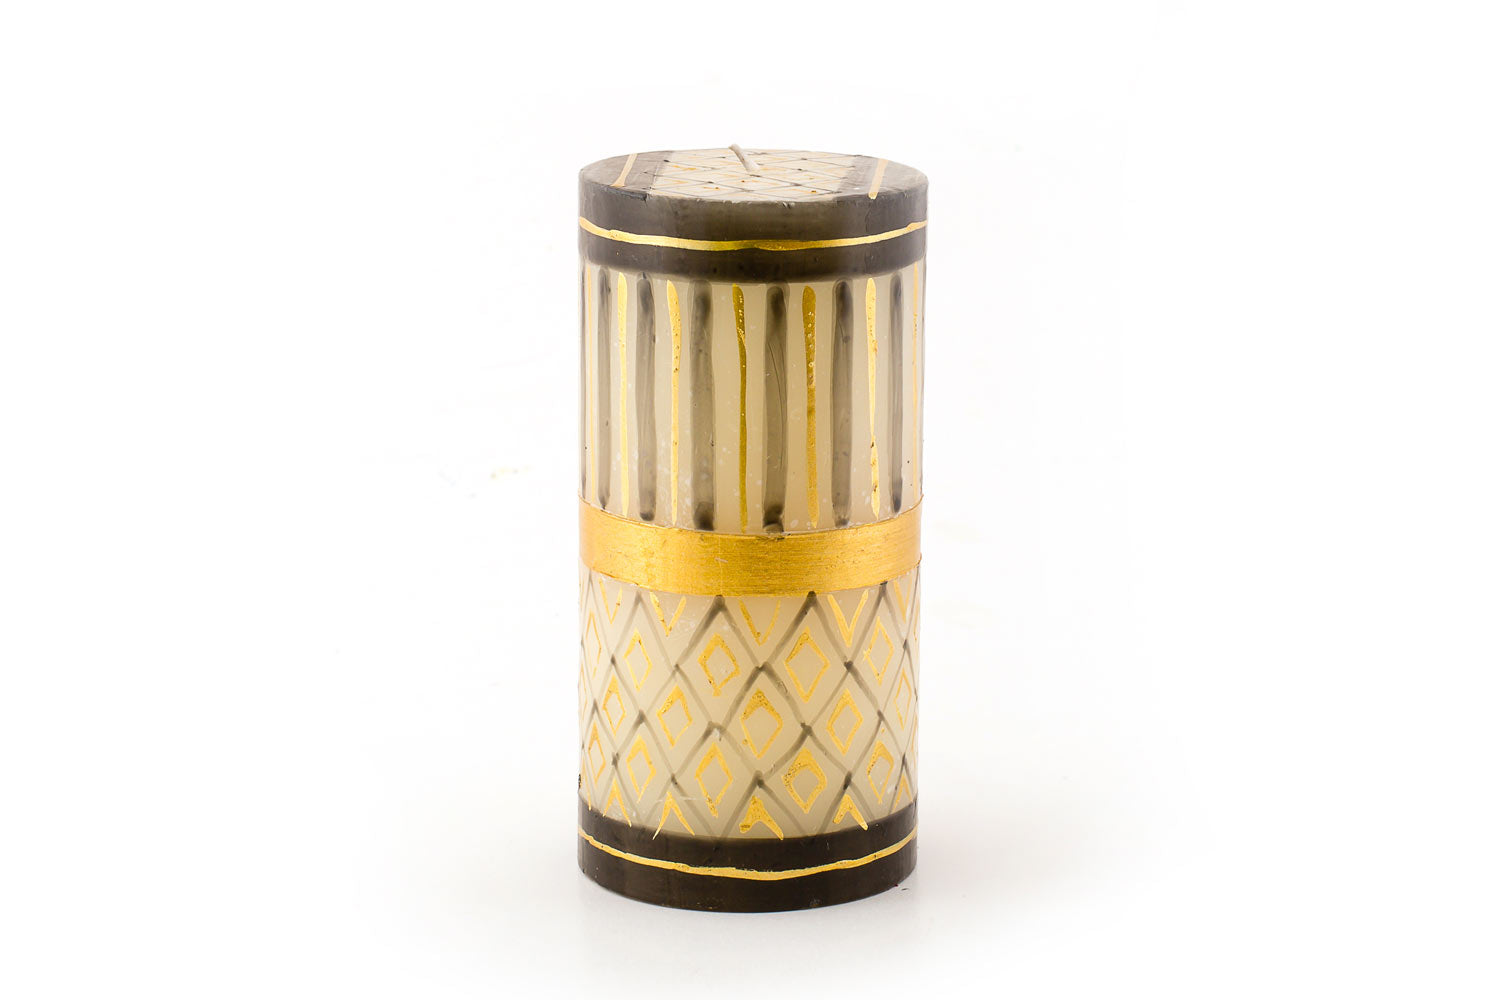 Celebration design 3" x 6" pillar candle.  White background with grey/black and gold hand painted design of stripes and geometric designs.  Fair Trade.